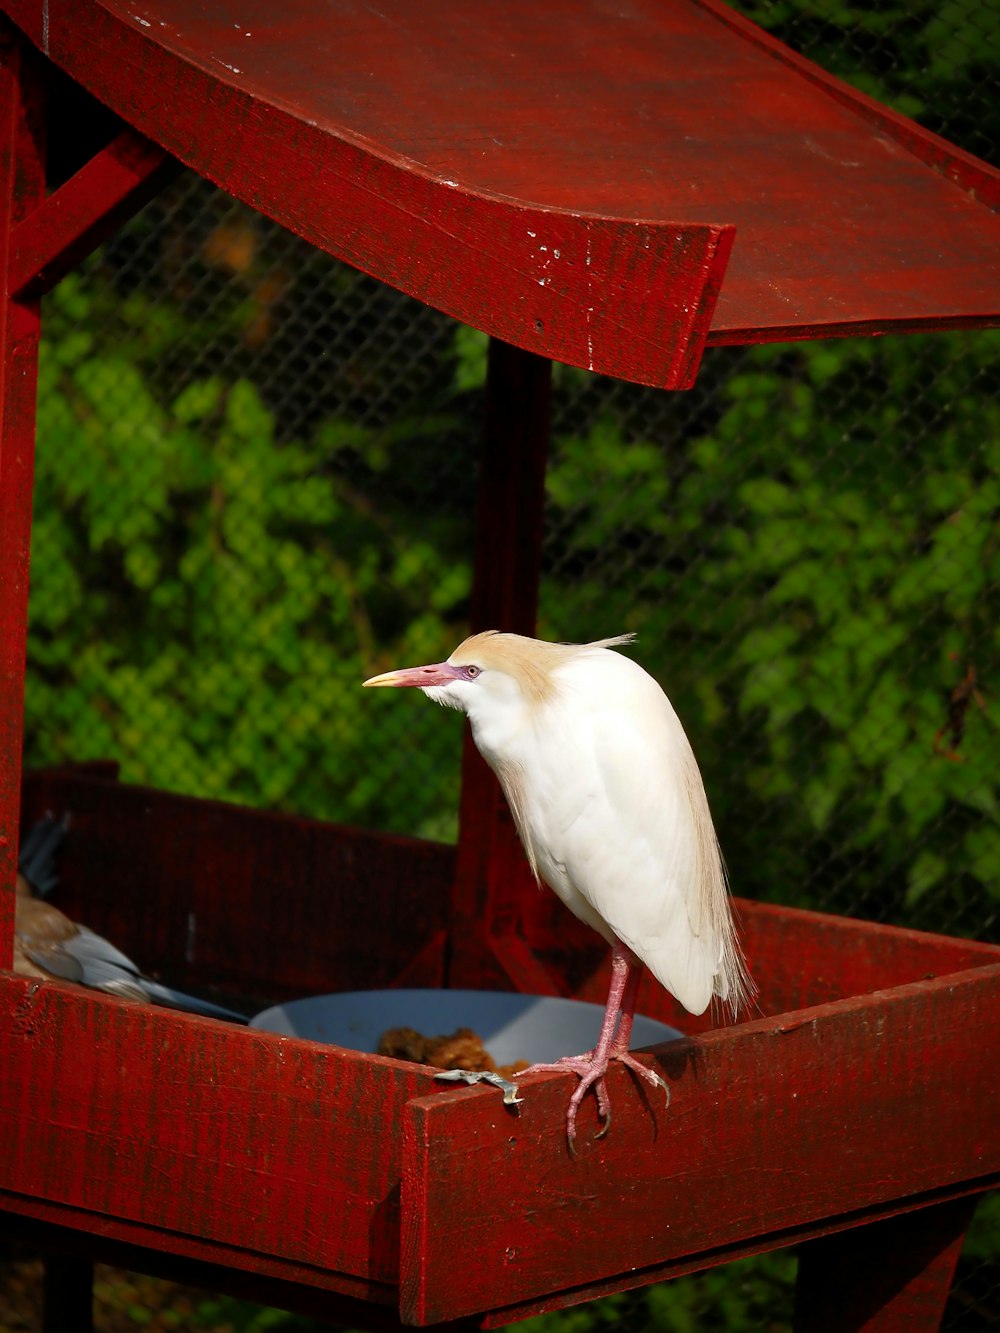 a white bird with a long beak standing in a red container